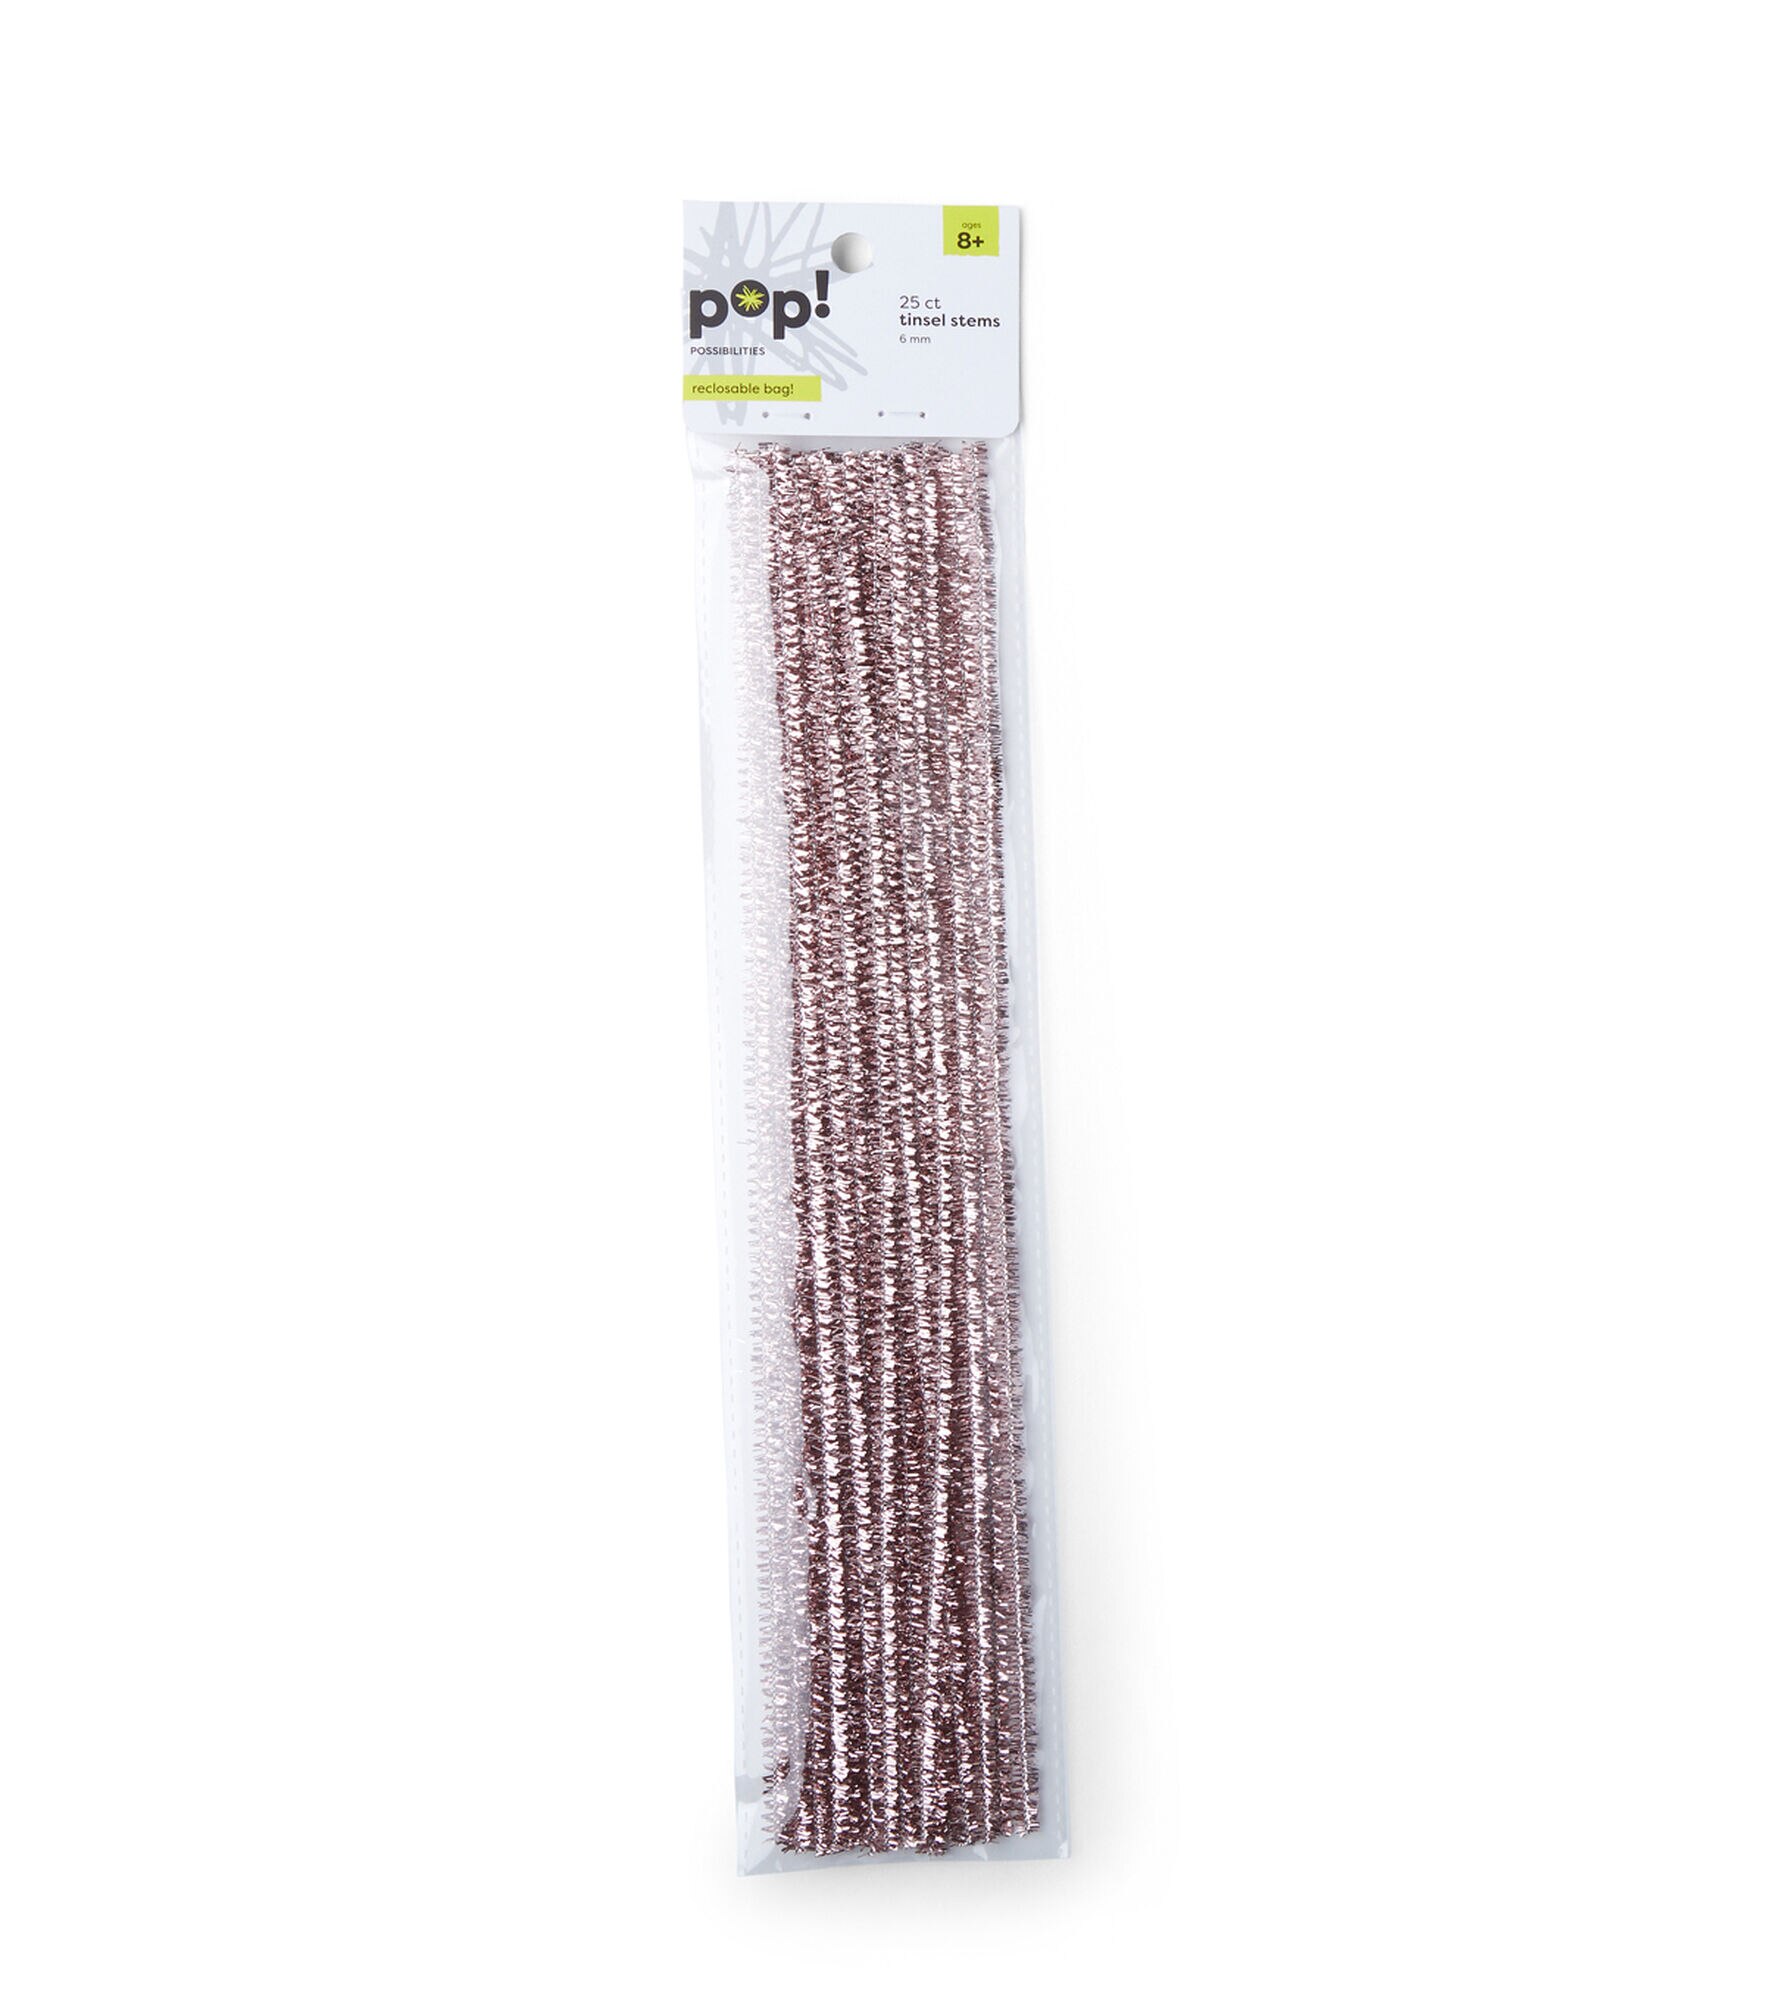 Gold Tinsel Stems, 6mm X 12 Inch, 25 Pack Chenille Pipe Cleaners